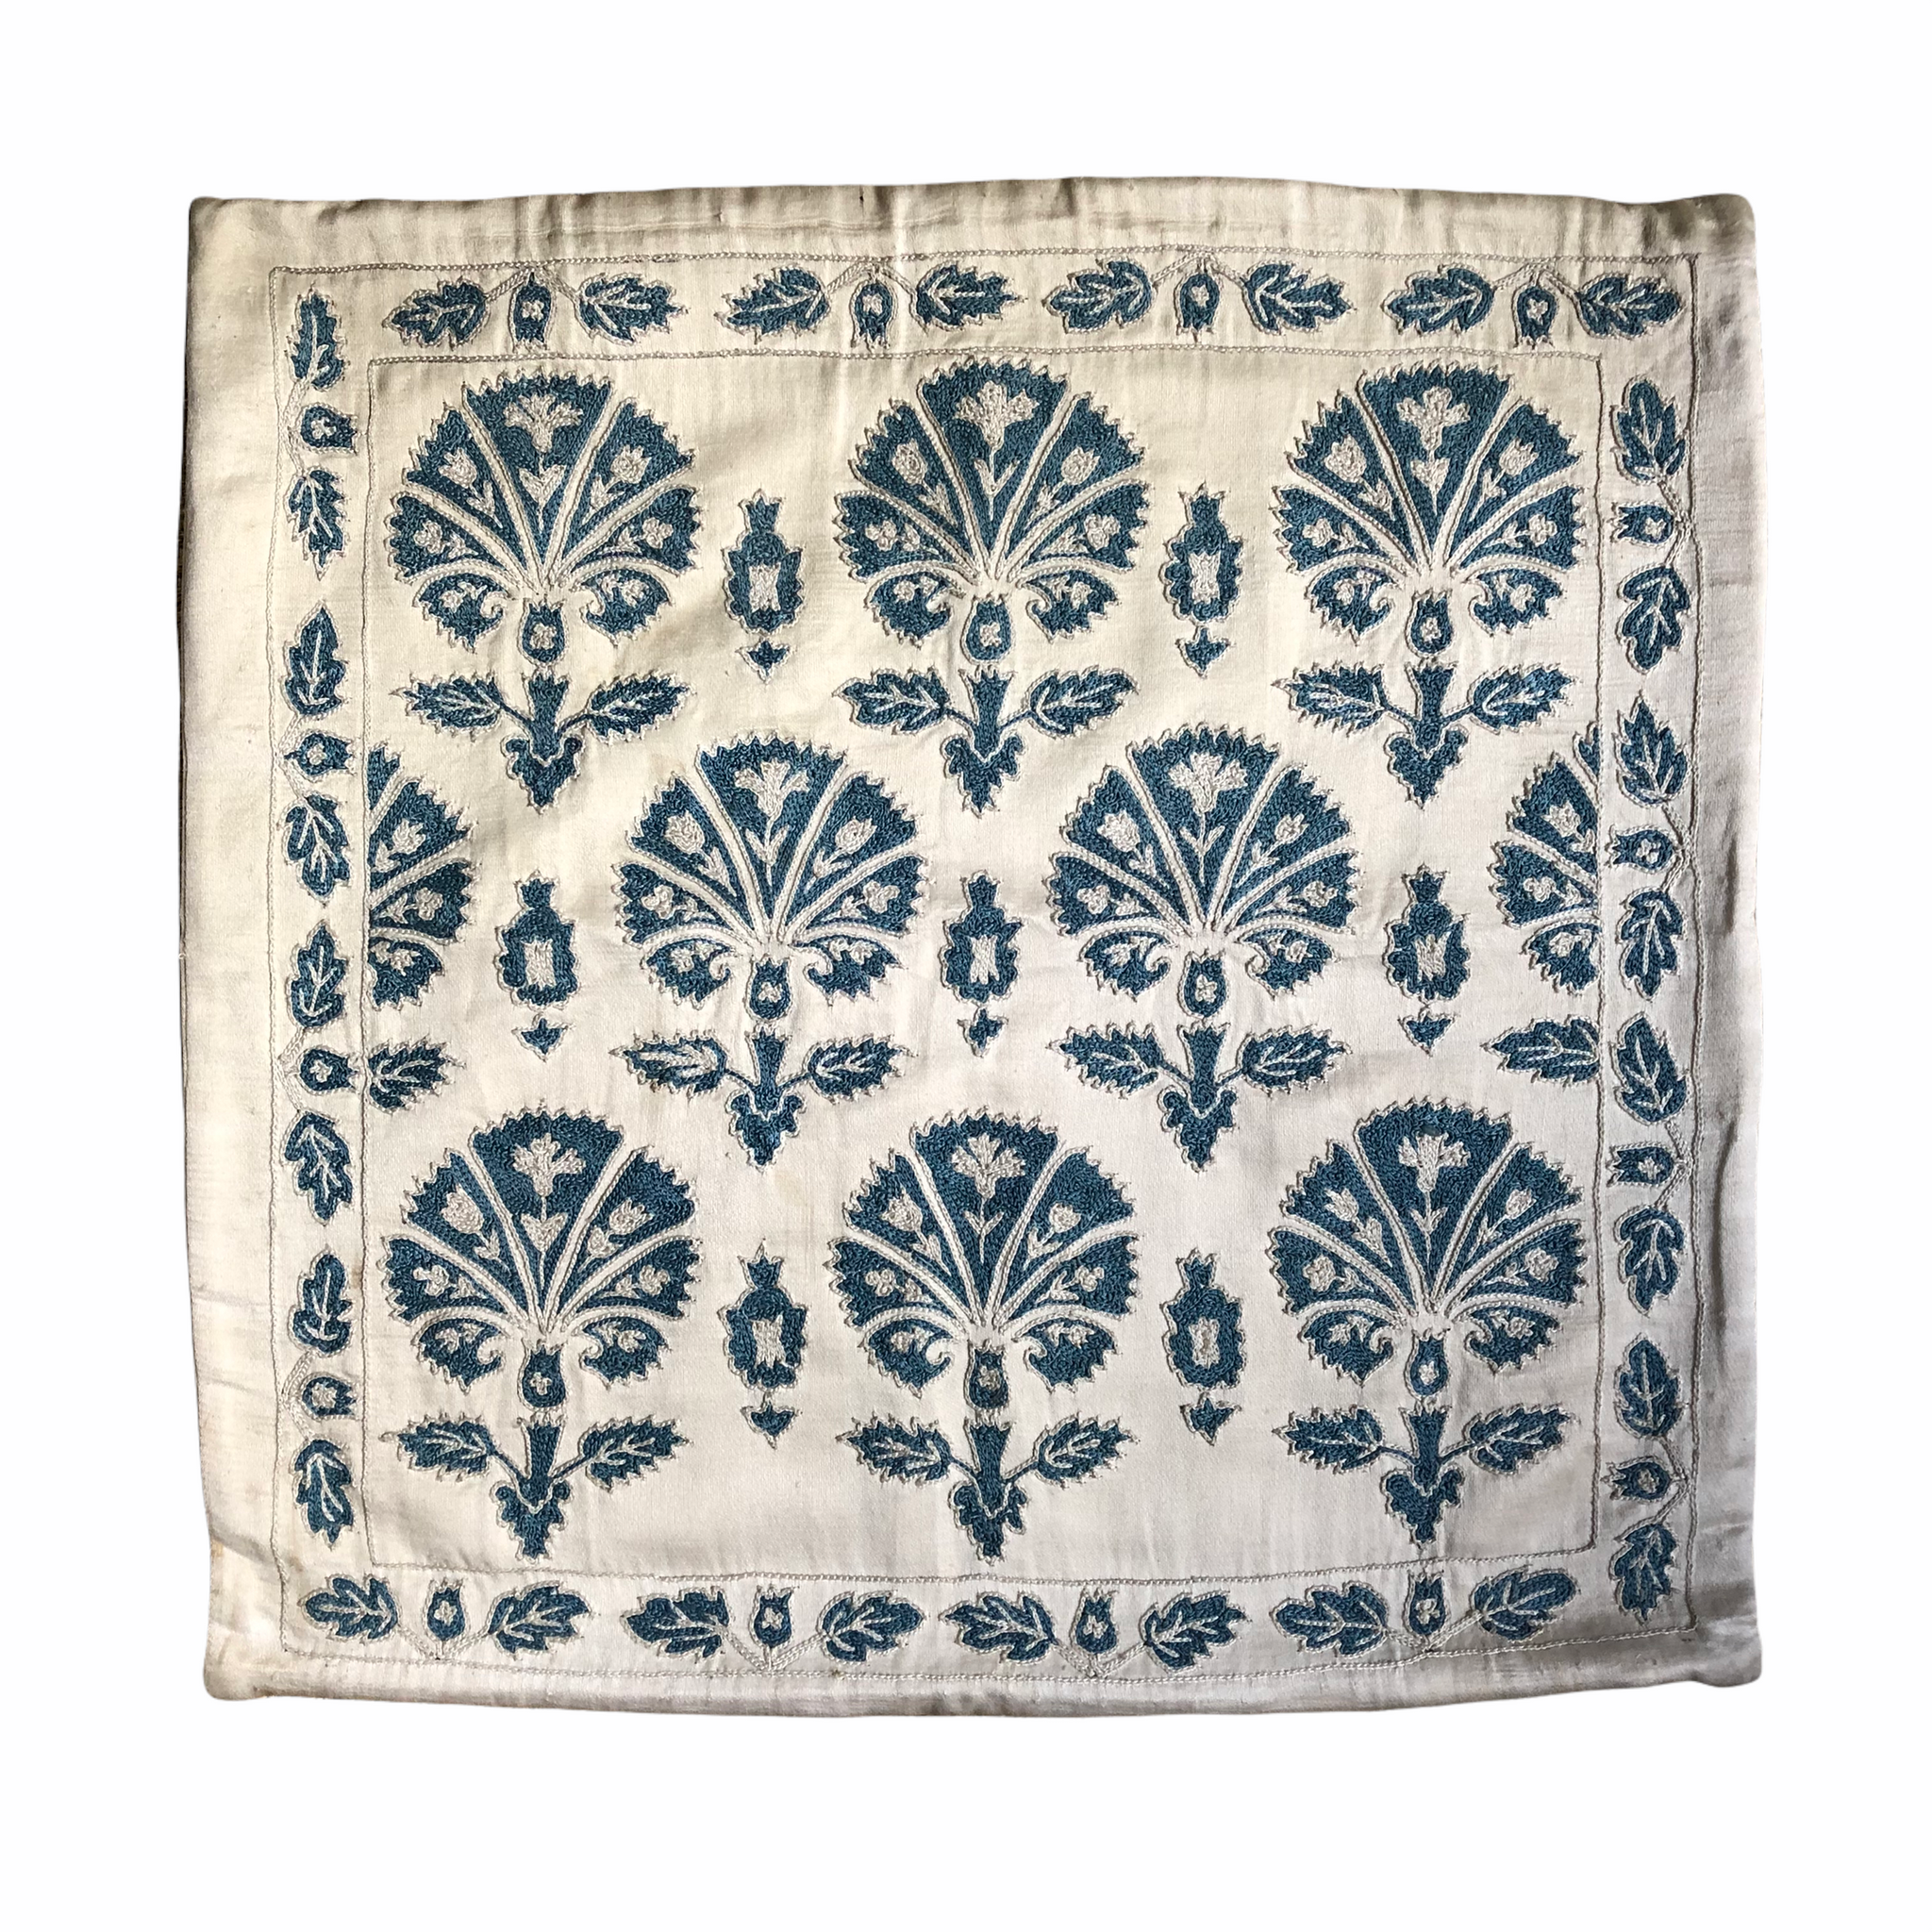 Embroidered Suzani Pillow